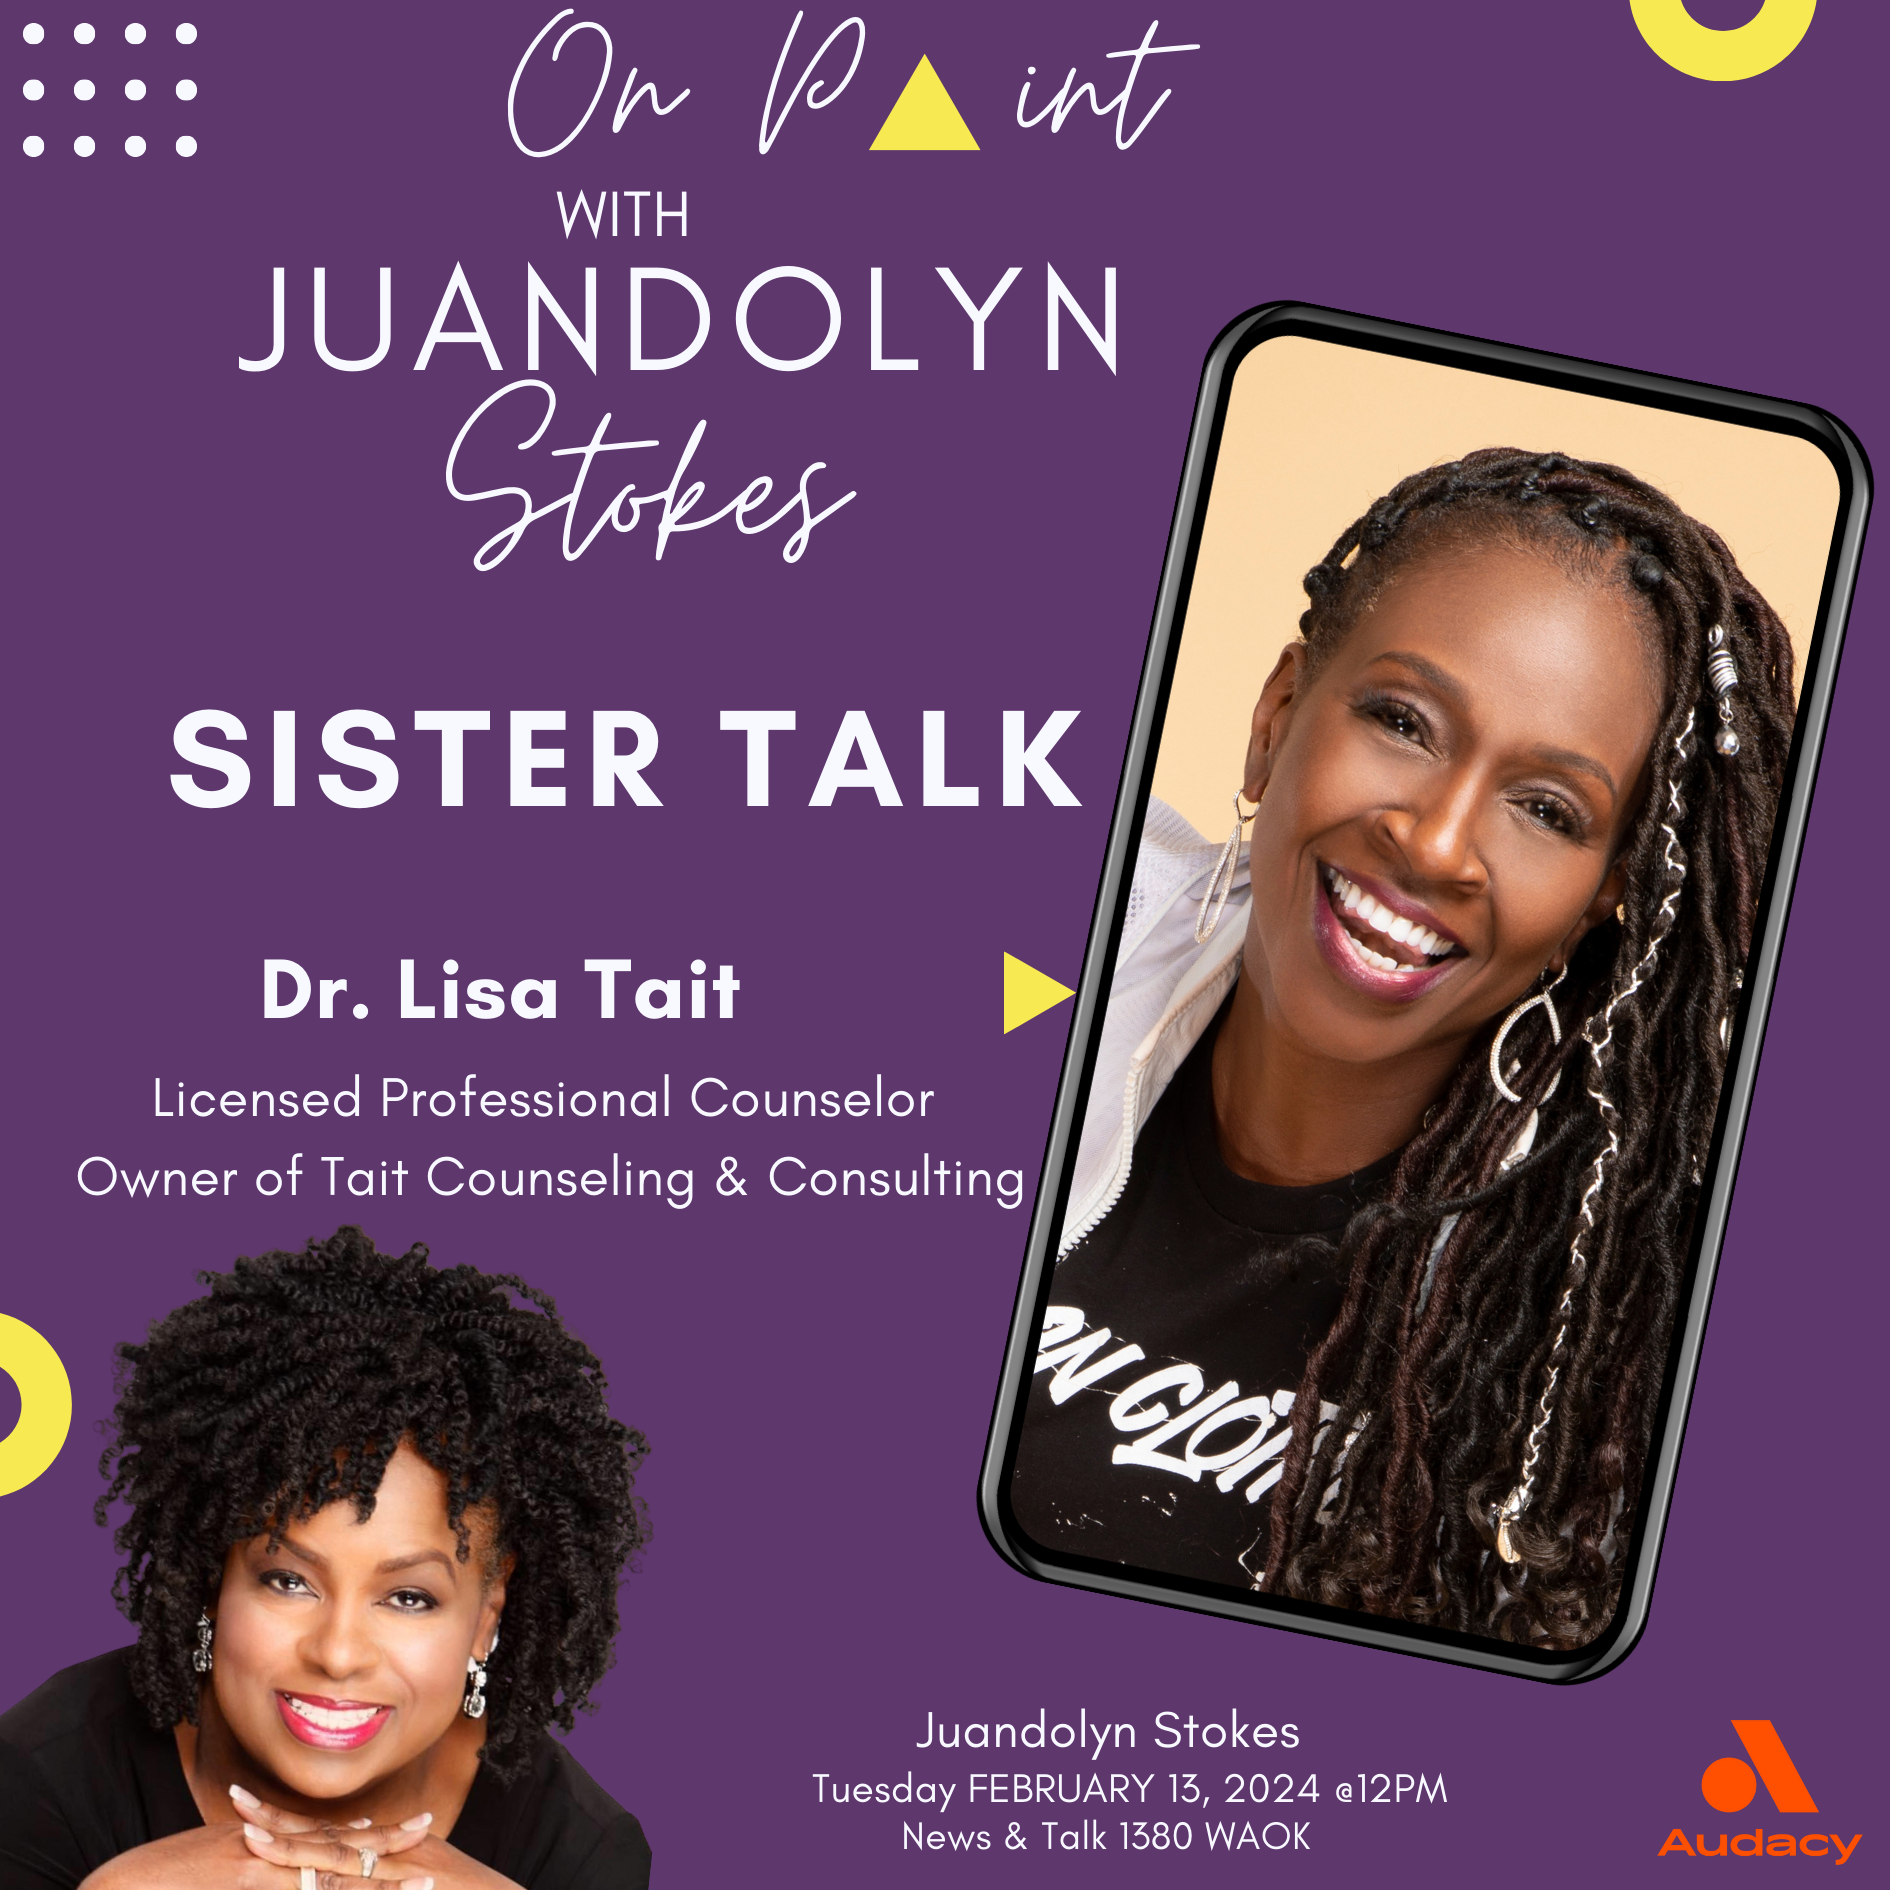 State of Relationships in our Community - Sister Talk with Dr. Tait and Juandolyn Stoke